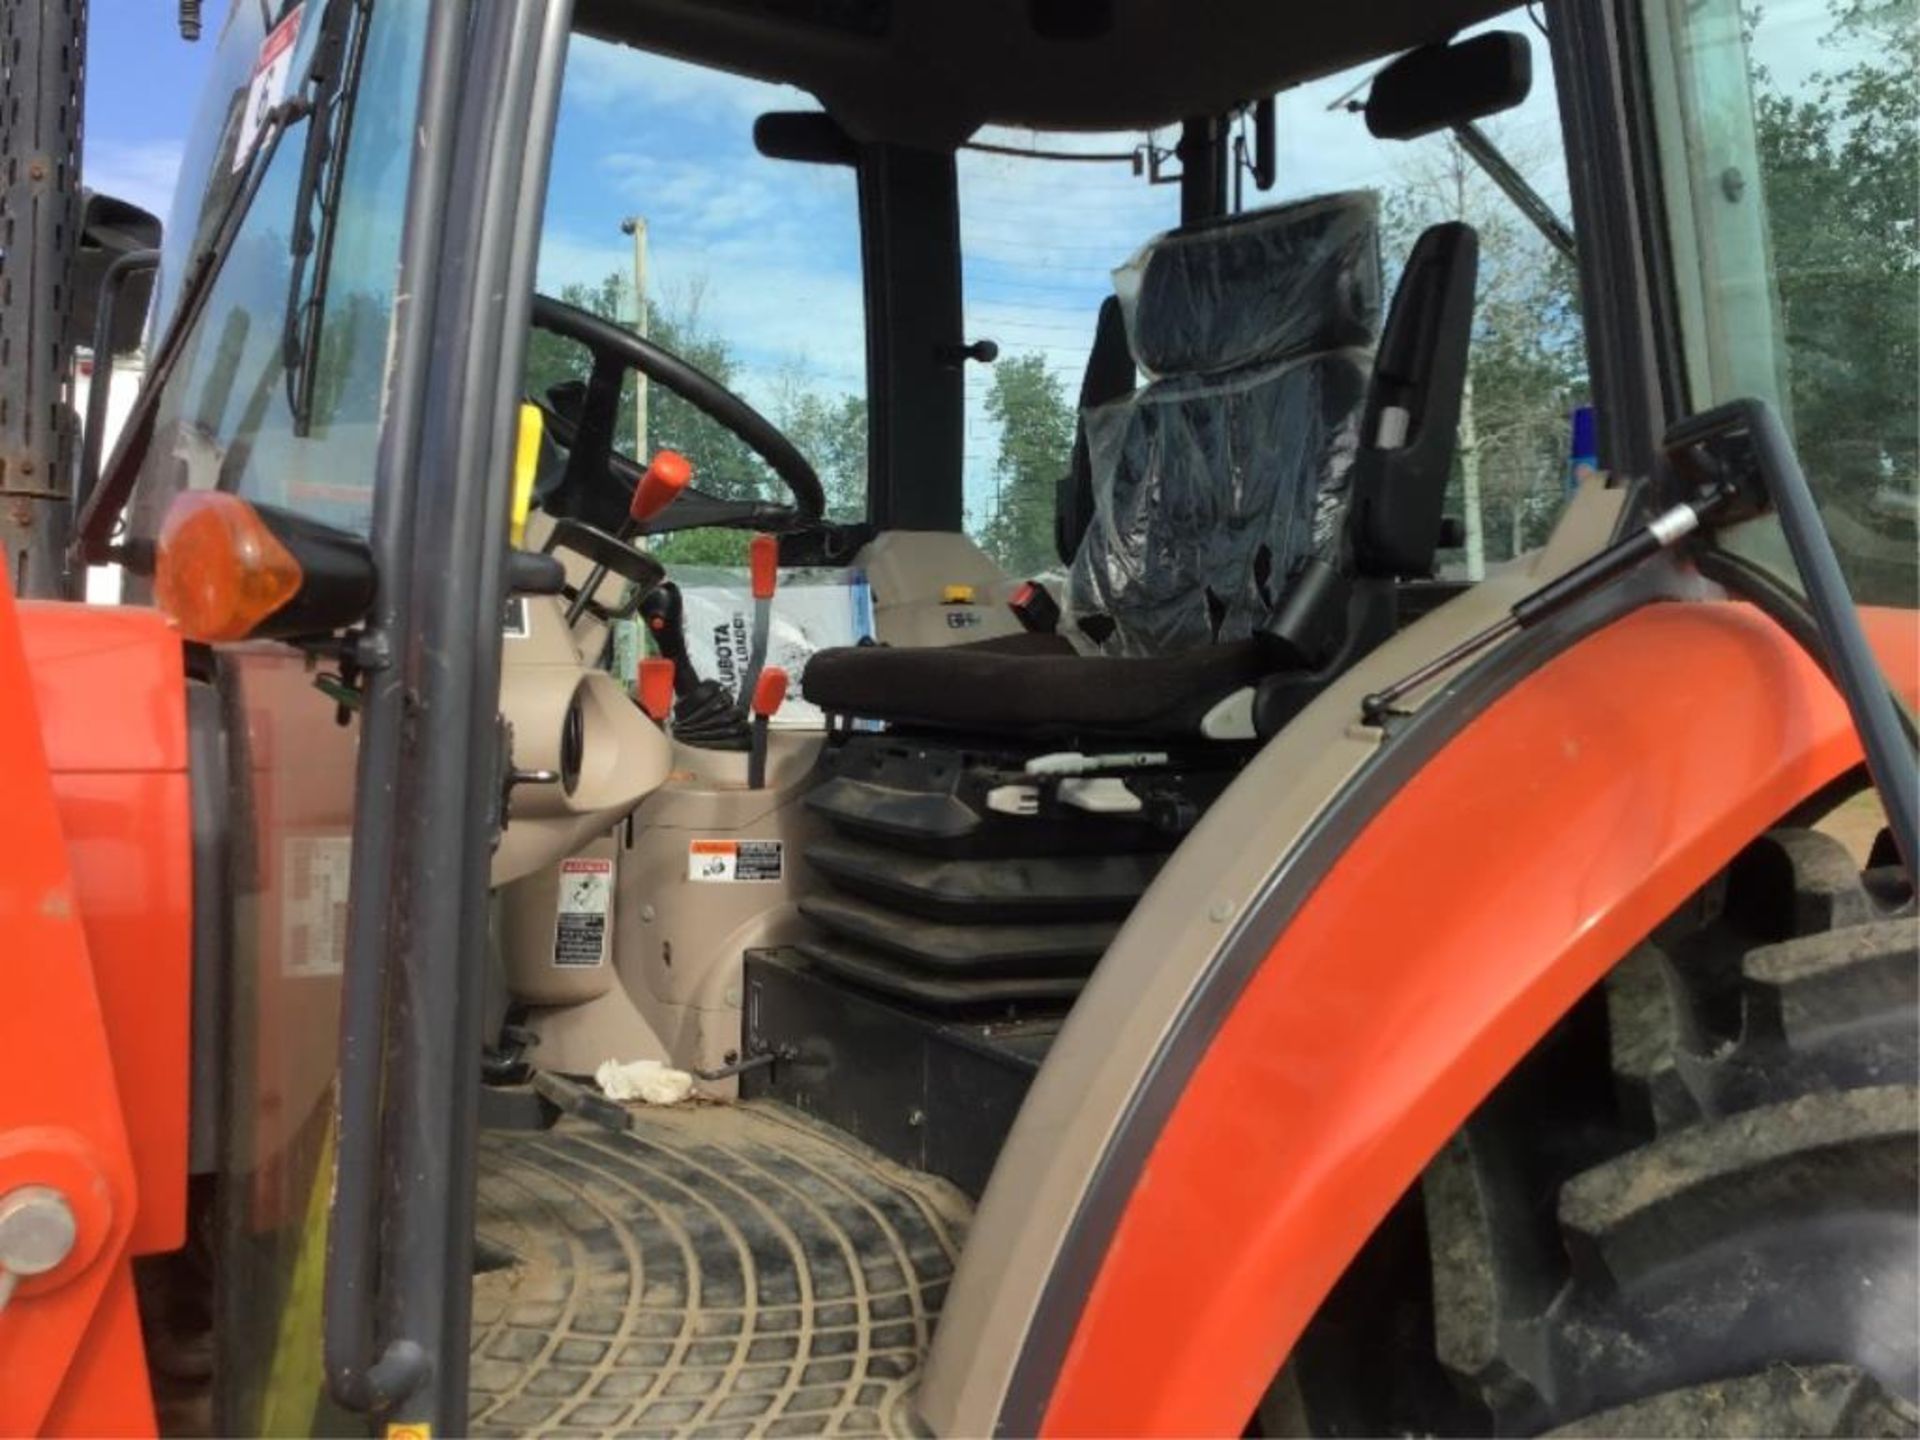 2011 M9540 Kubota Tractor W/ LA353 Front End Loader & Bucket, 2 Forks(may sell sepesrate), 1104 - Image 8 of 12